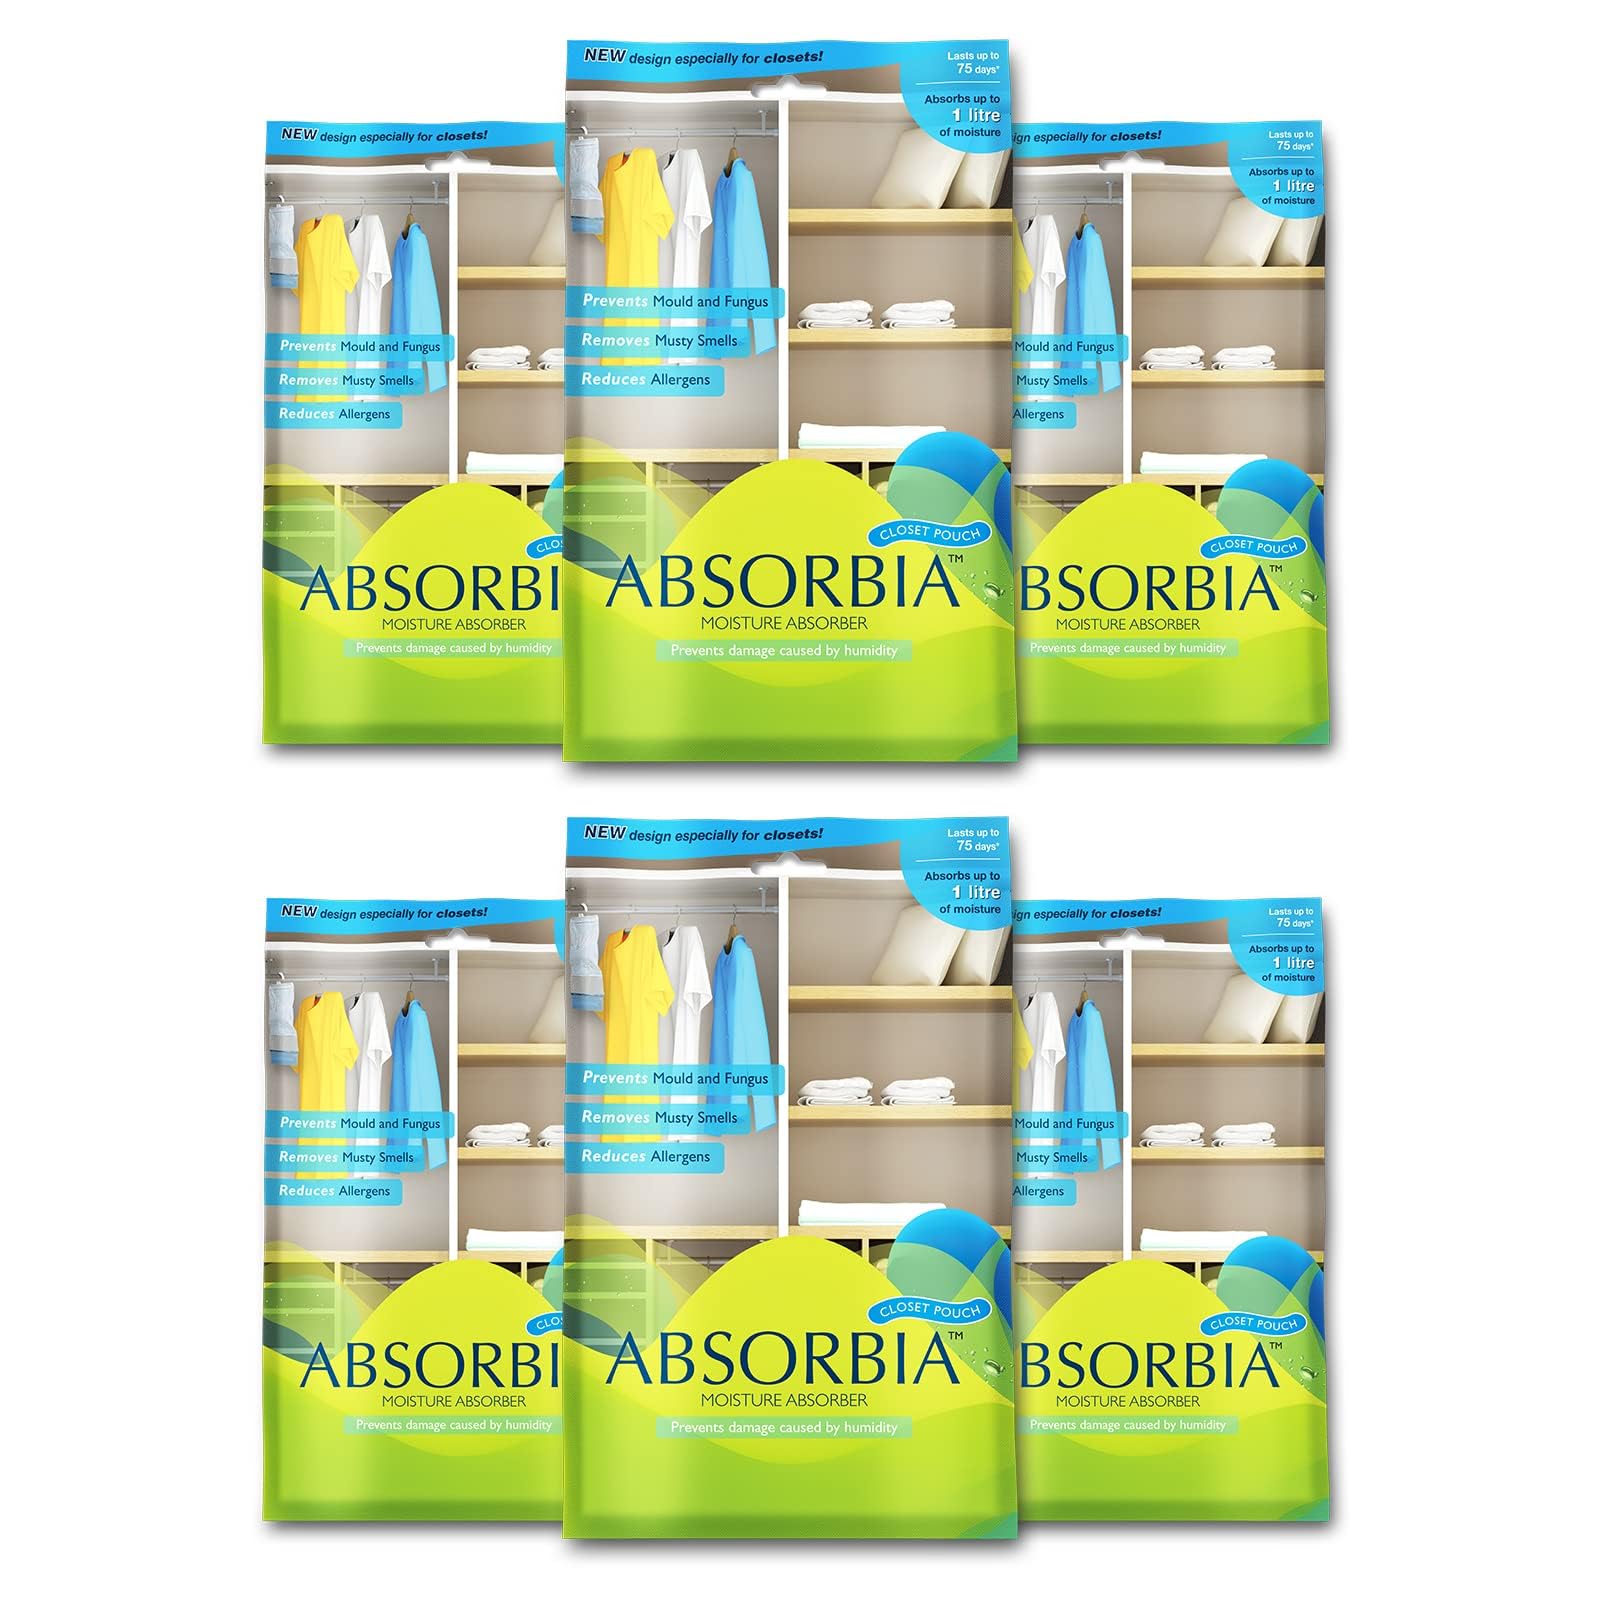 Absorbia Moisture Absorber| Absorbia Hanging Pouch - Season Pack of 48 (880ml Each) | Dehumidifier for Wardrobe, Closet Bathroom| Fights Against Moisture, Mould, Fungus Musty Smells…